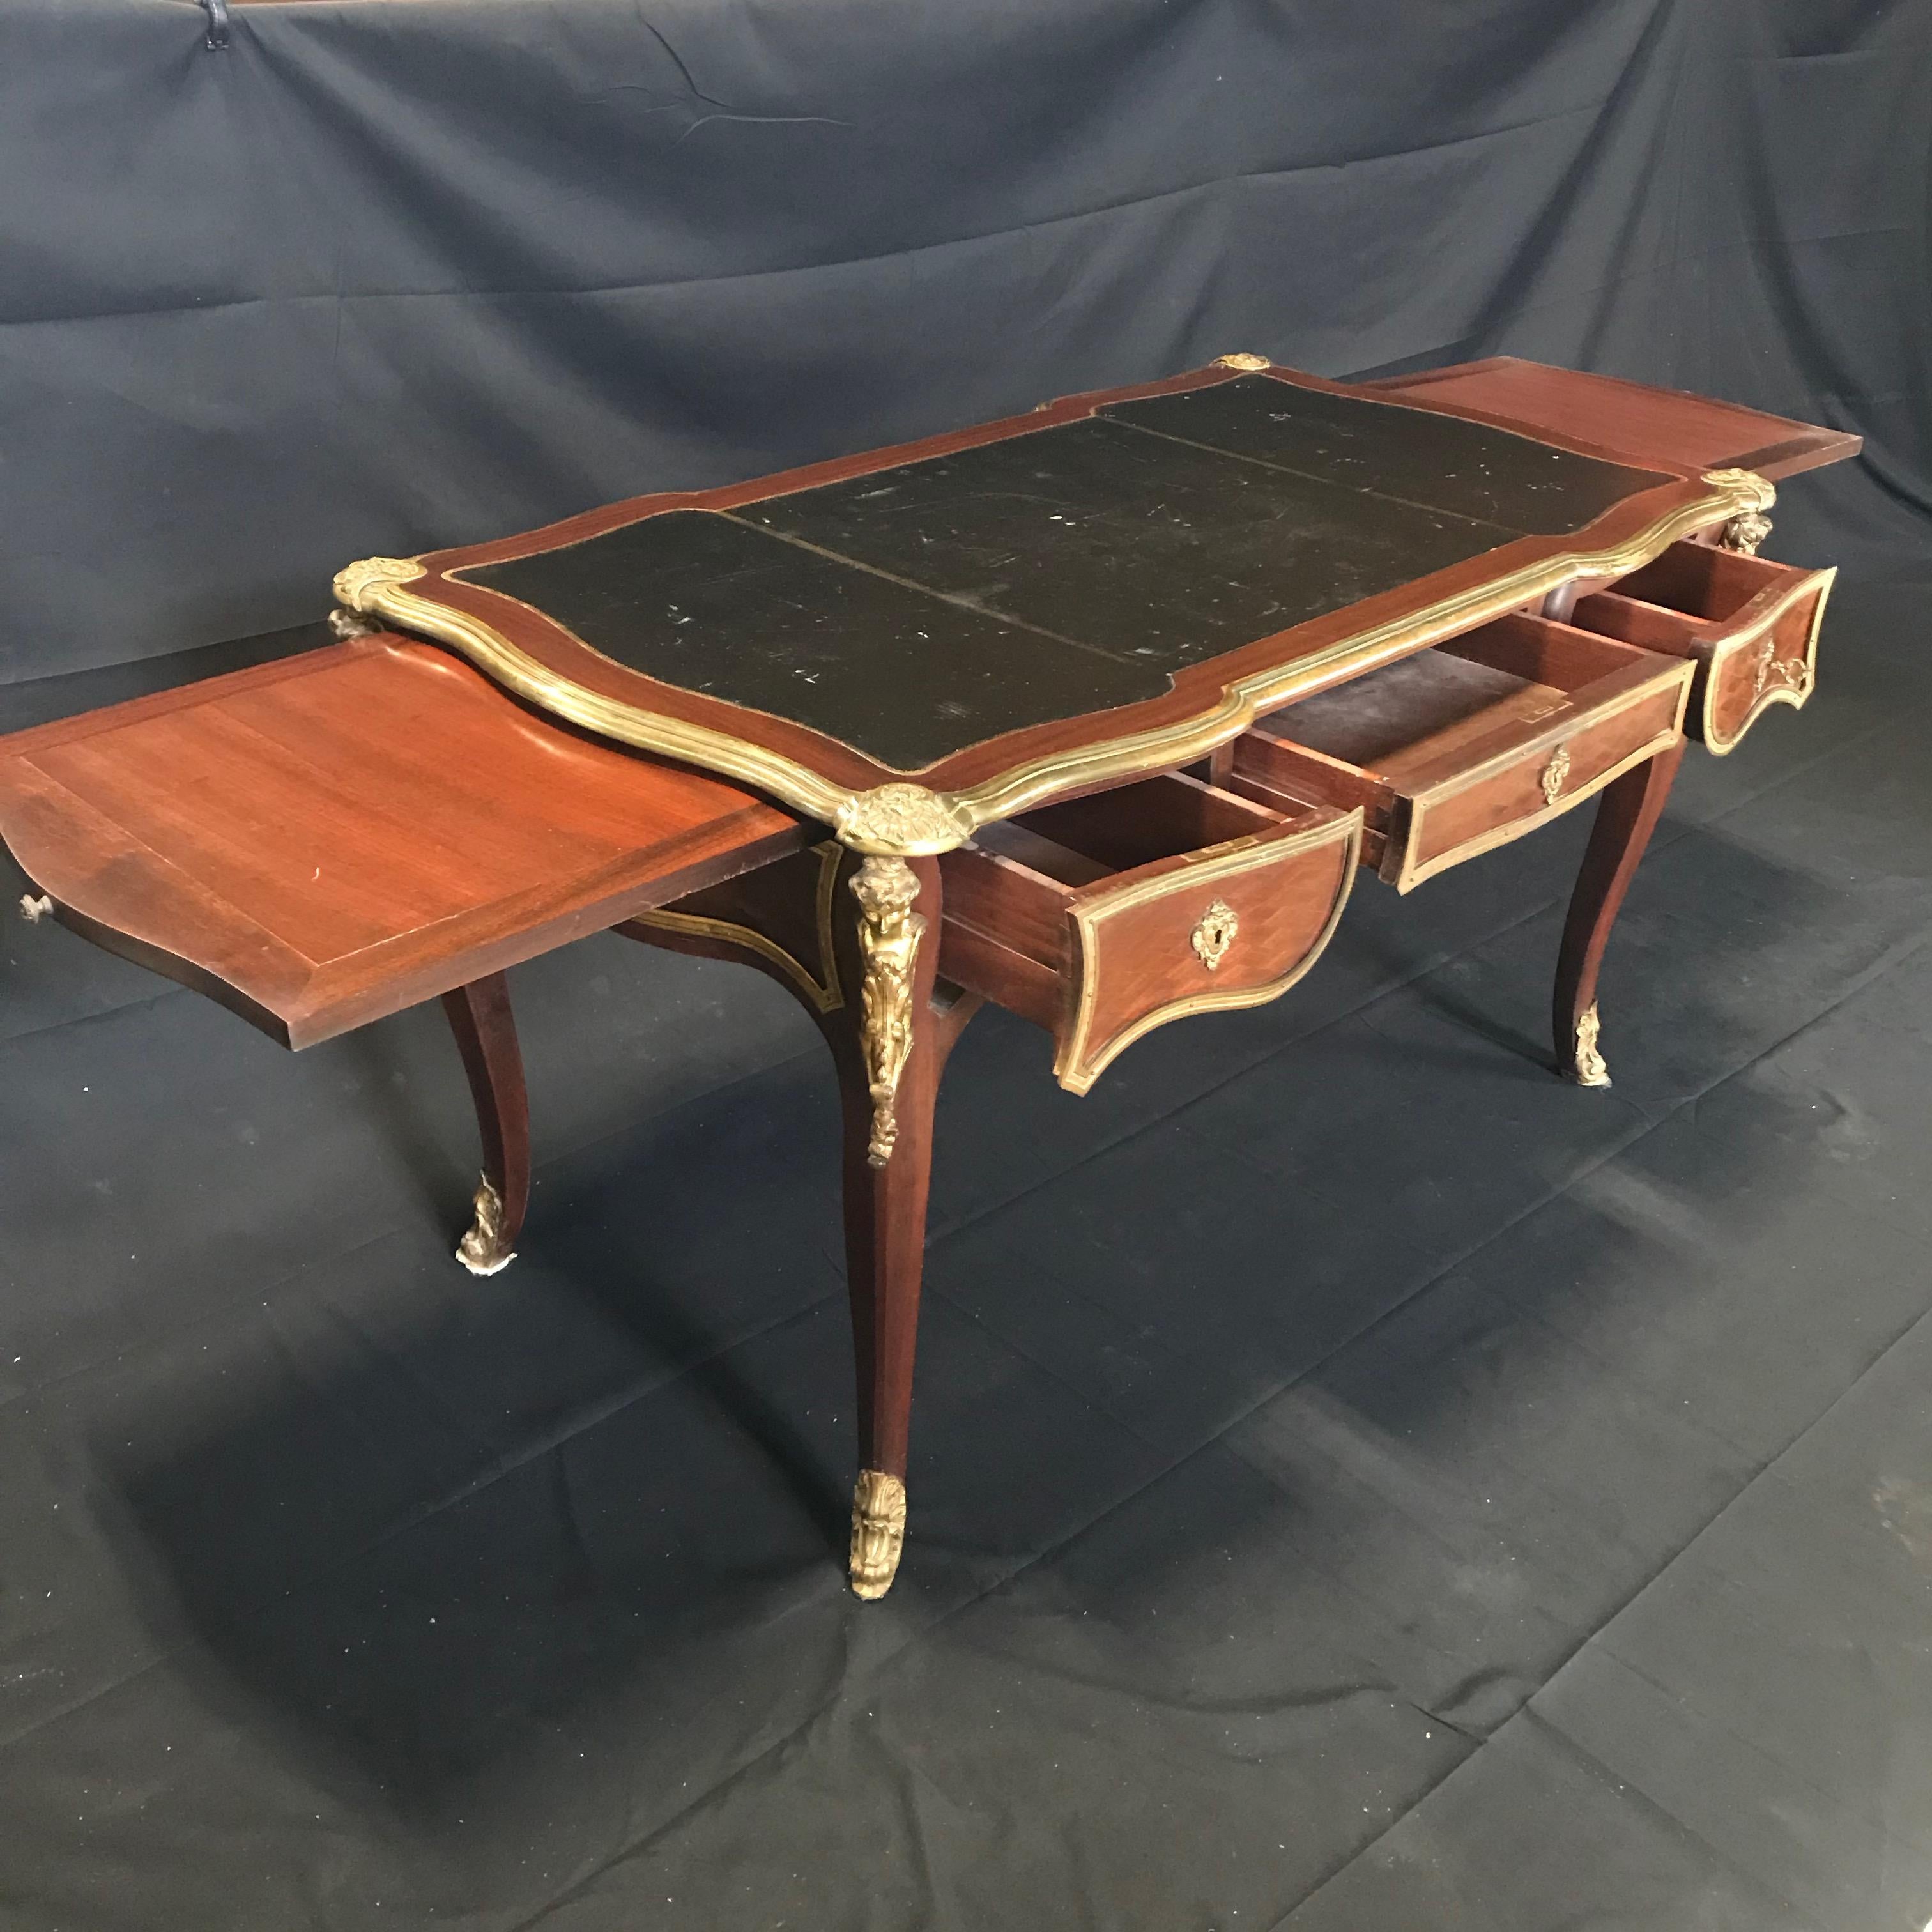 A very fine French 19th century Louis XV style ormolu-mounted mahogany and
kingwood three-drawer bureau plat having a rectangular curvy shaped top that frames
a handsome tooled black leather writing surface. There are molded borders above
three